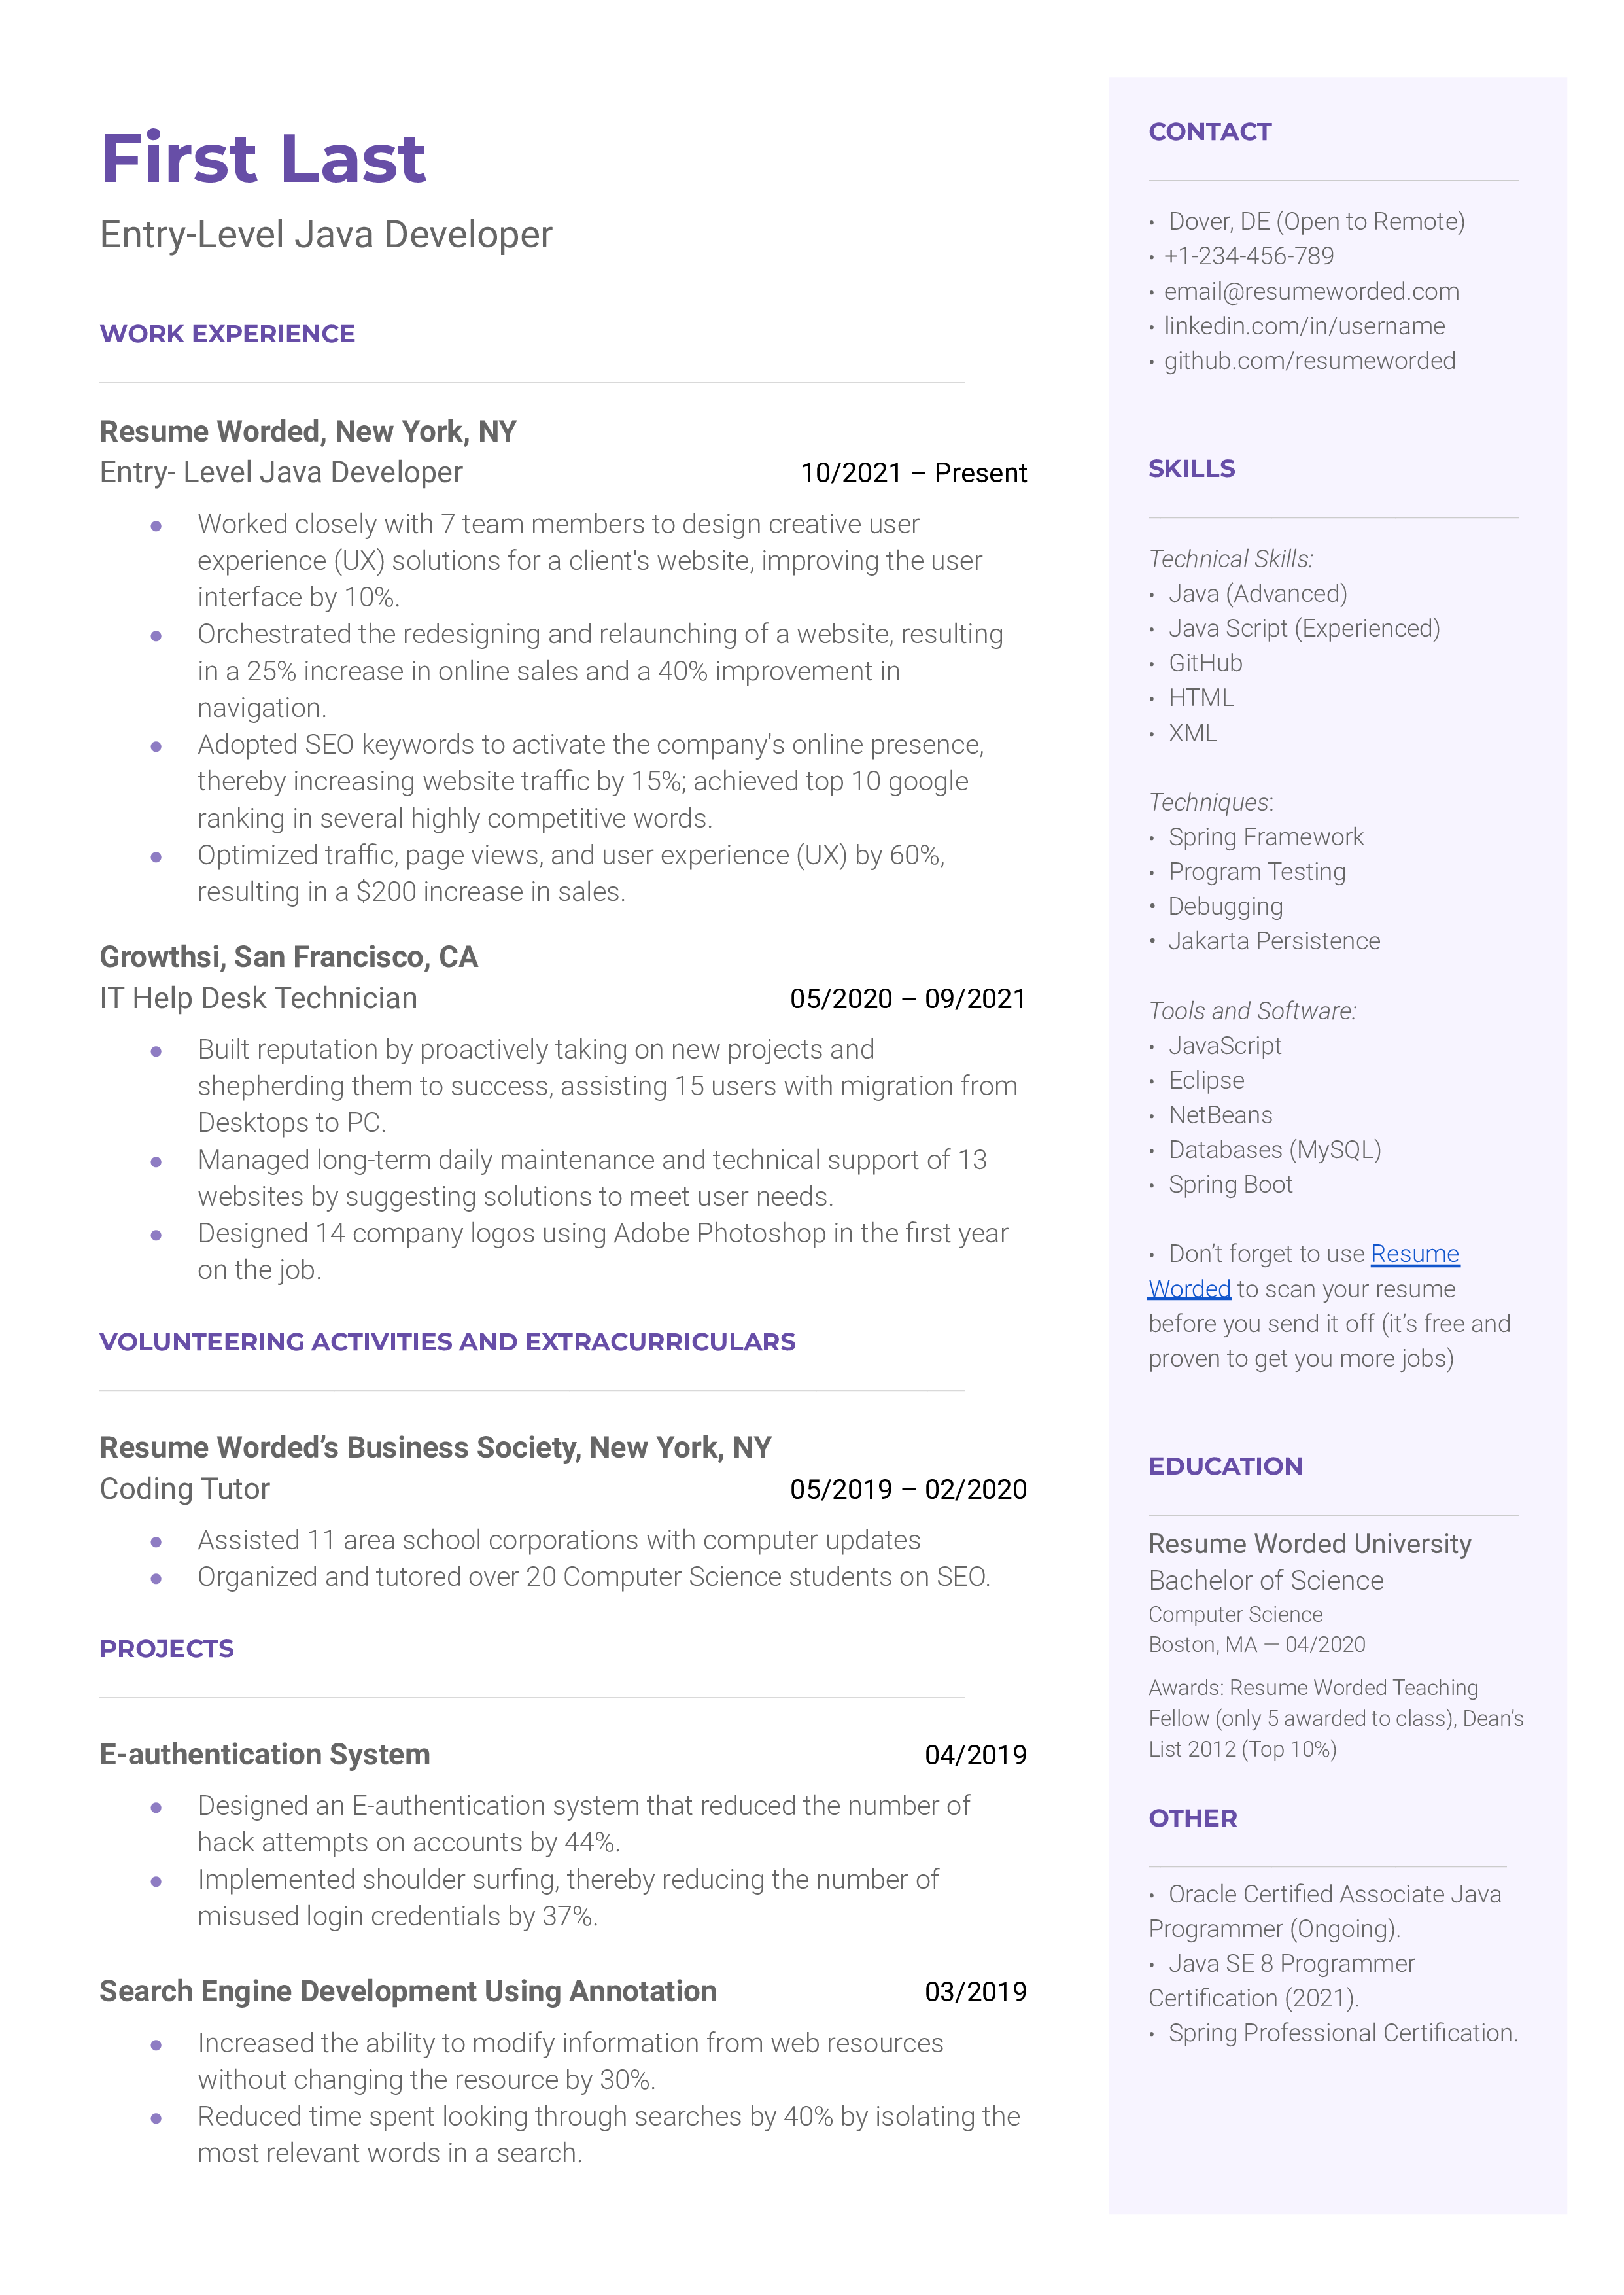 A CV screenshot showcasing an entry-level Java developer's qualifications, practical experience, and familiarity with Agile methodologies.